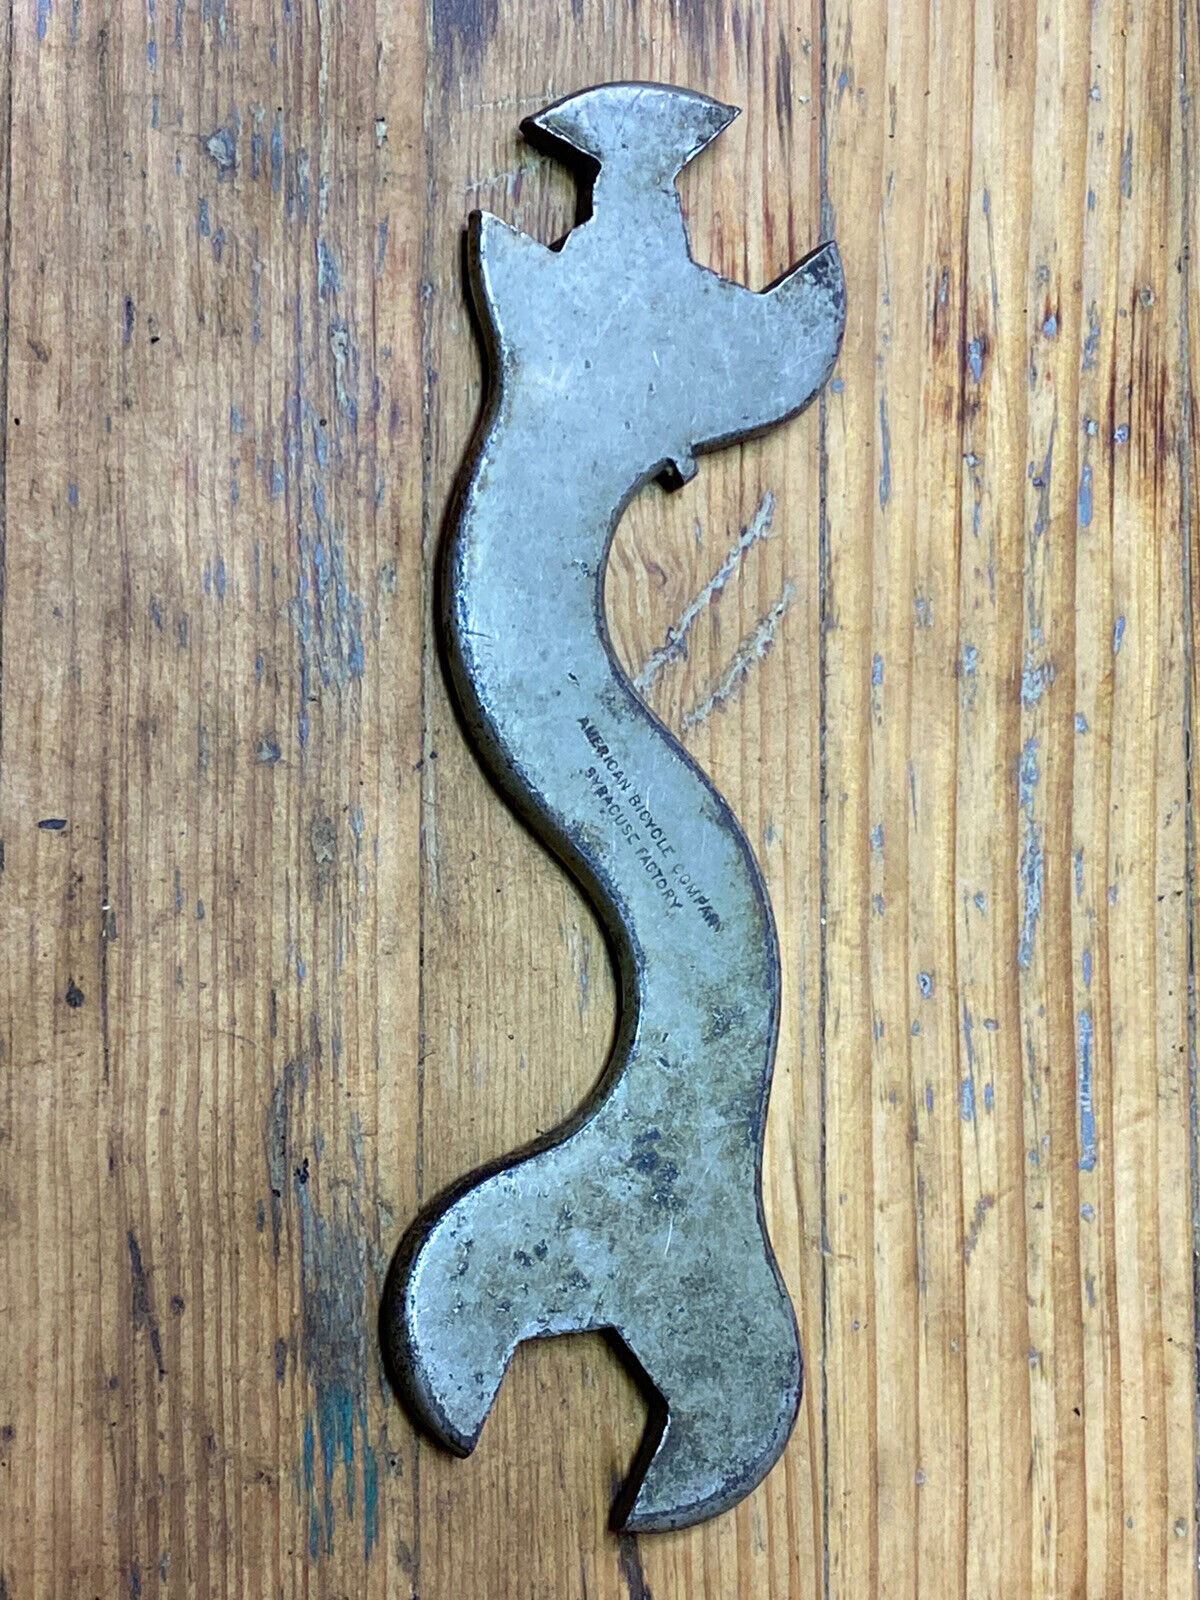 Rare American Bicycle Company Wrench 1899 - 1903 Syracuse Factory